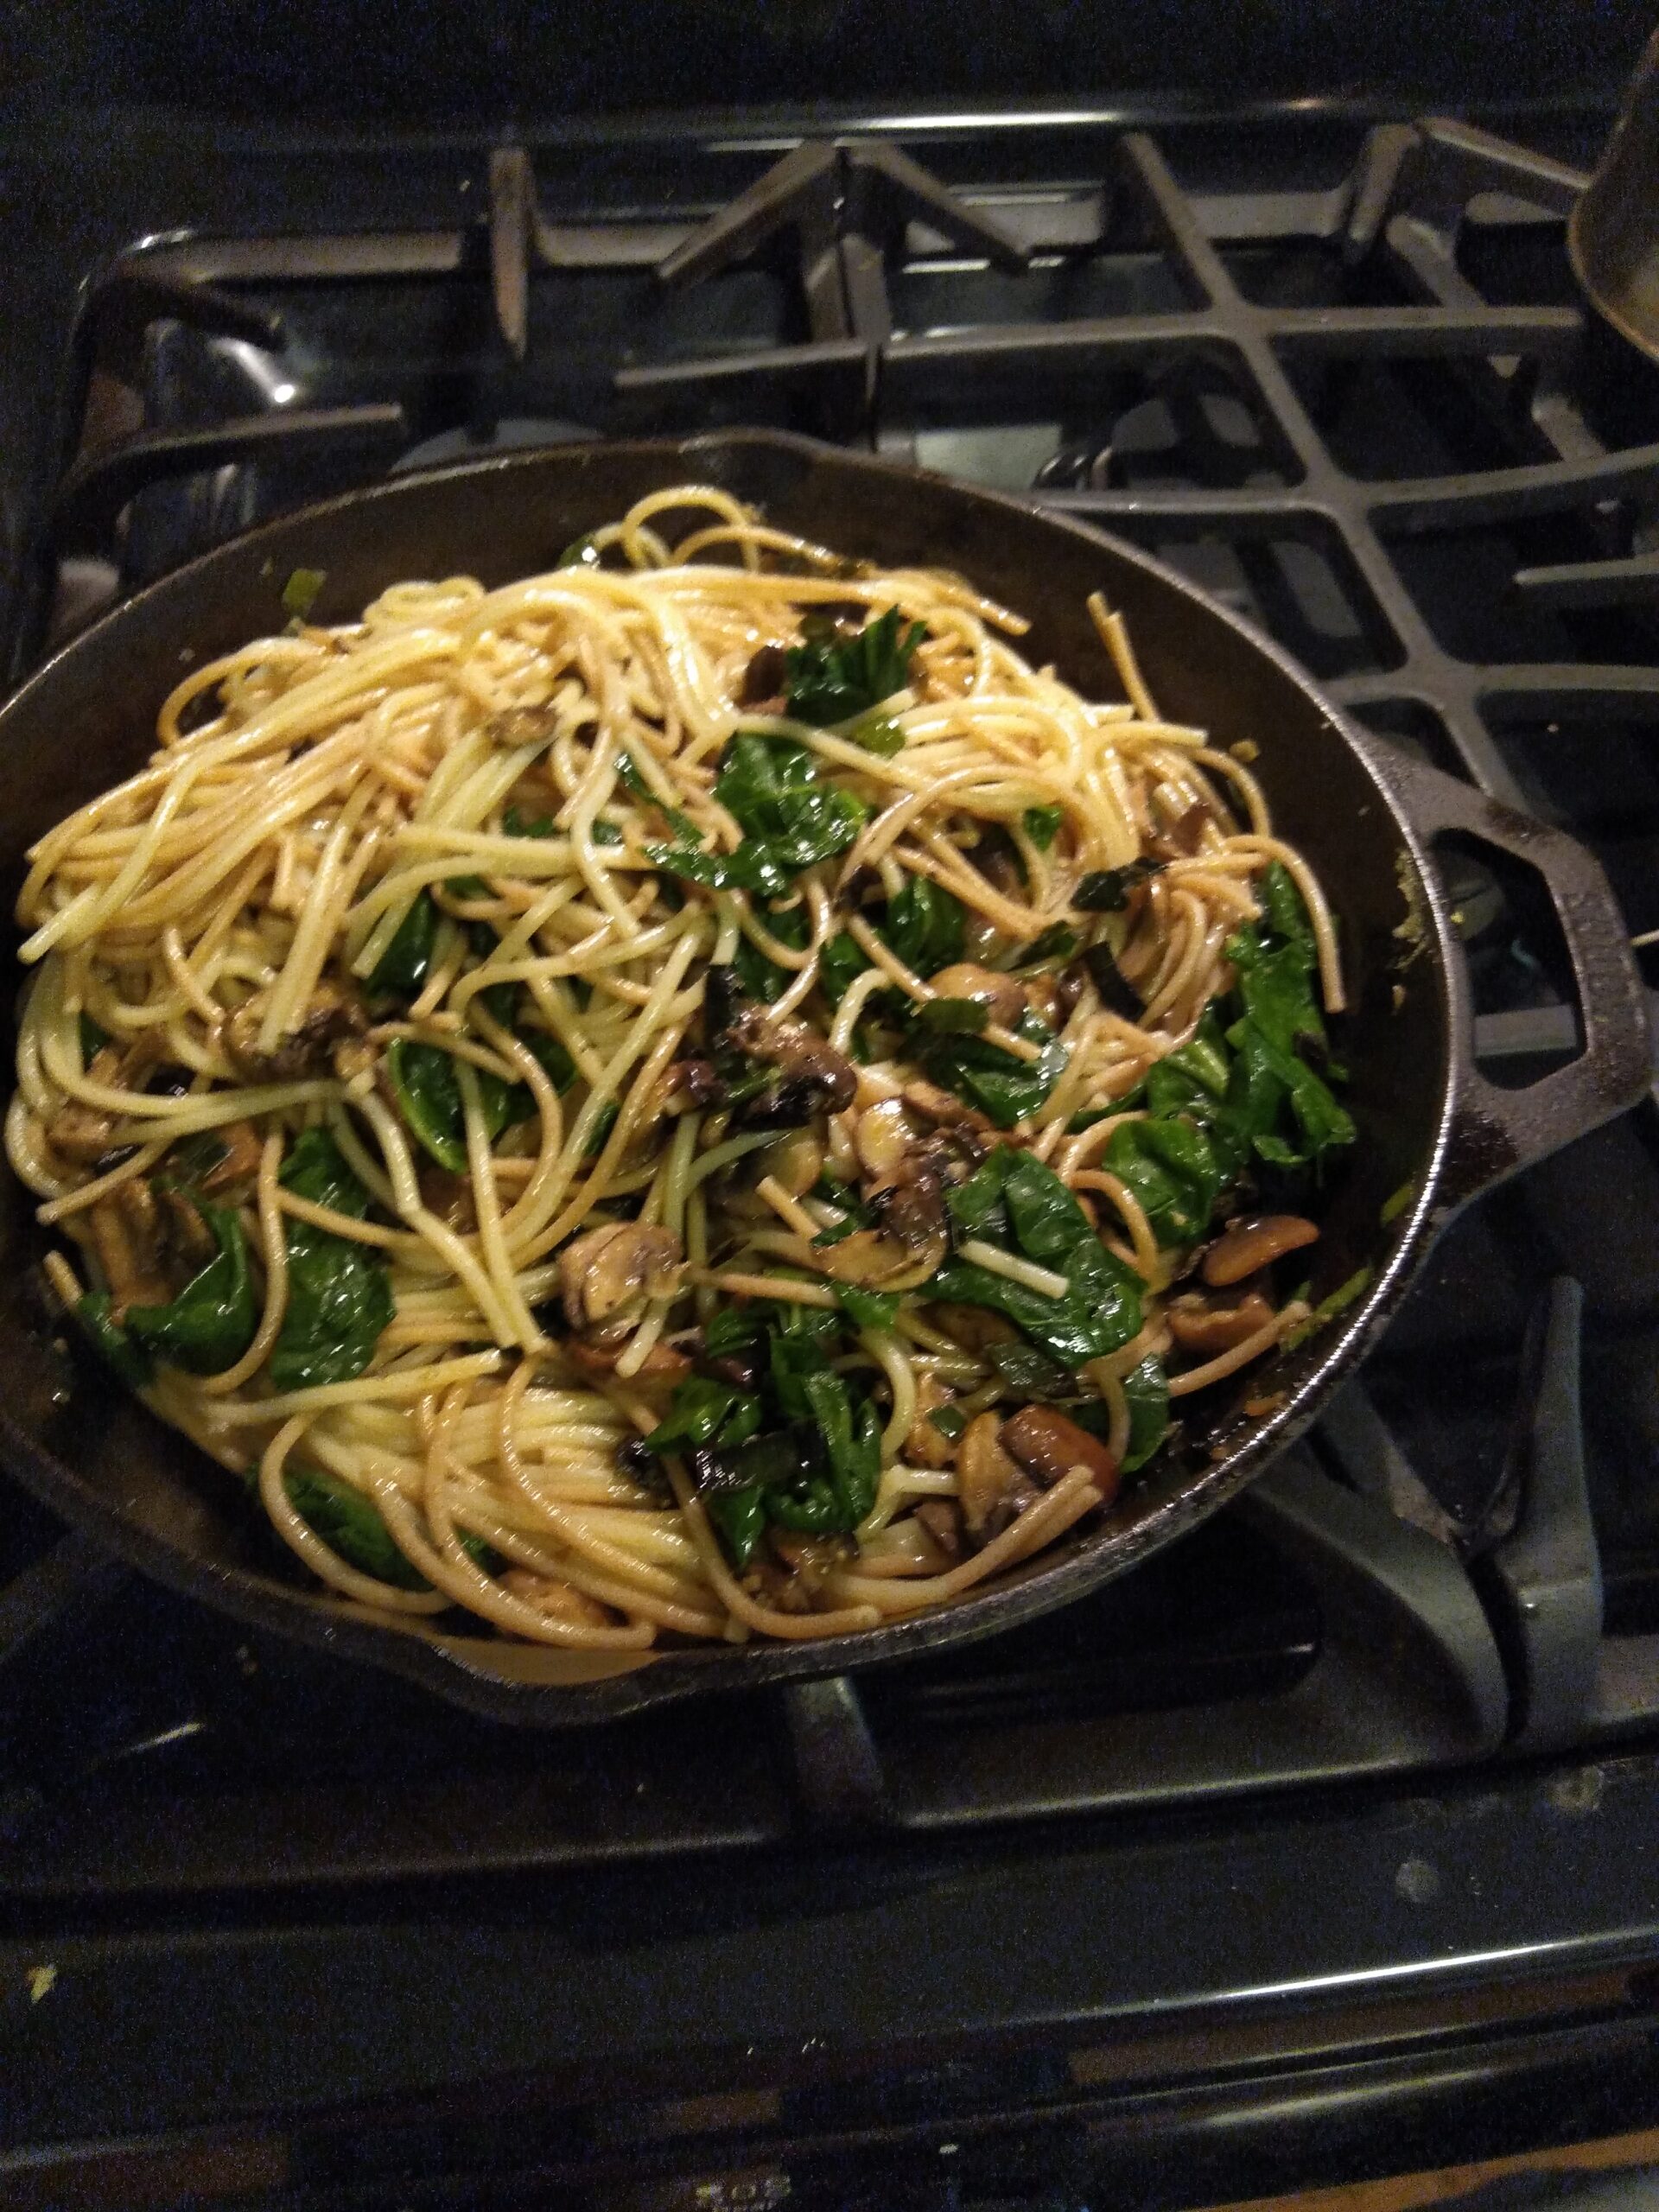 You are currently viewing Spinach, Scallions, and Spaghetti